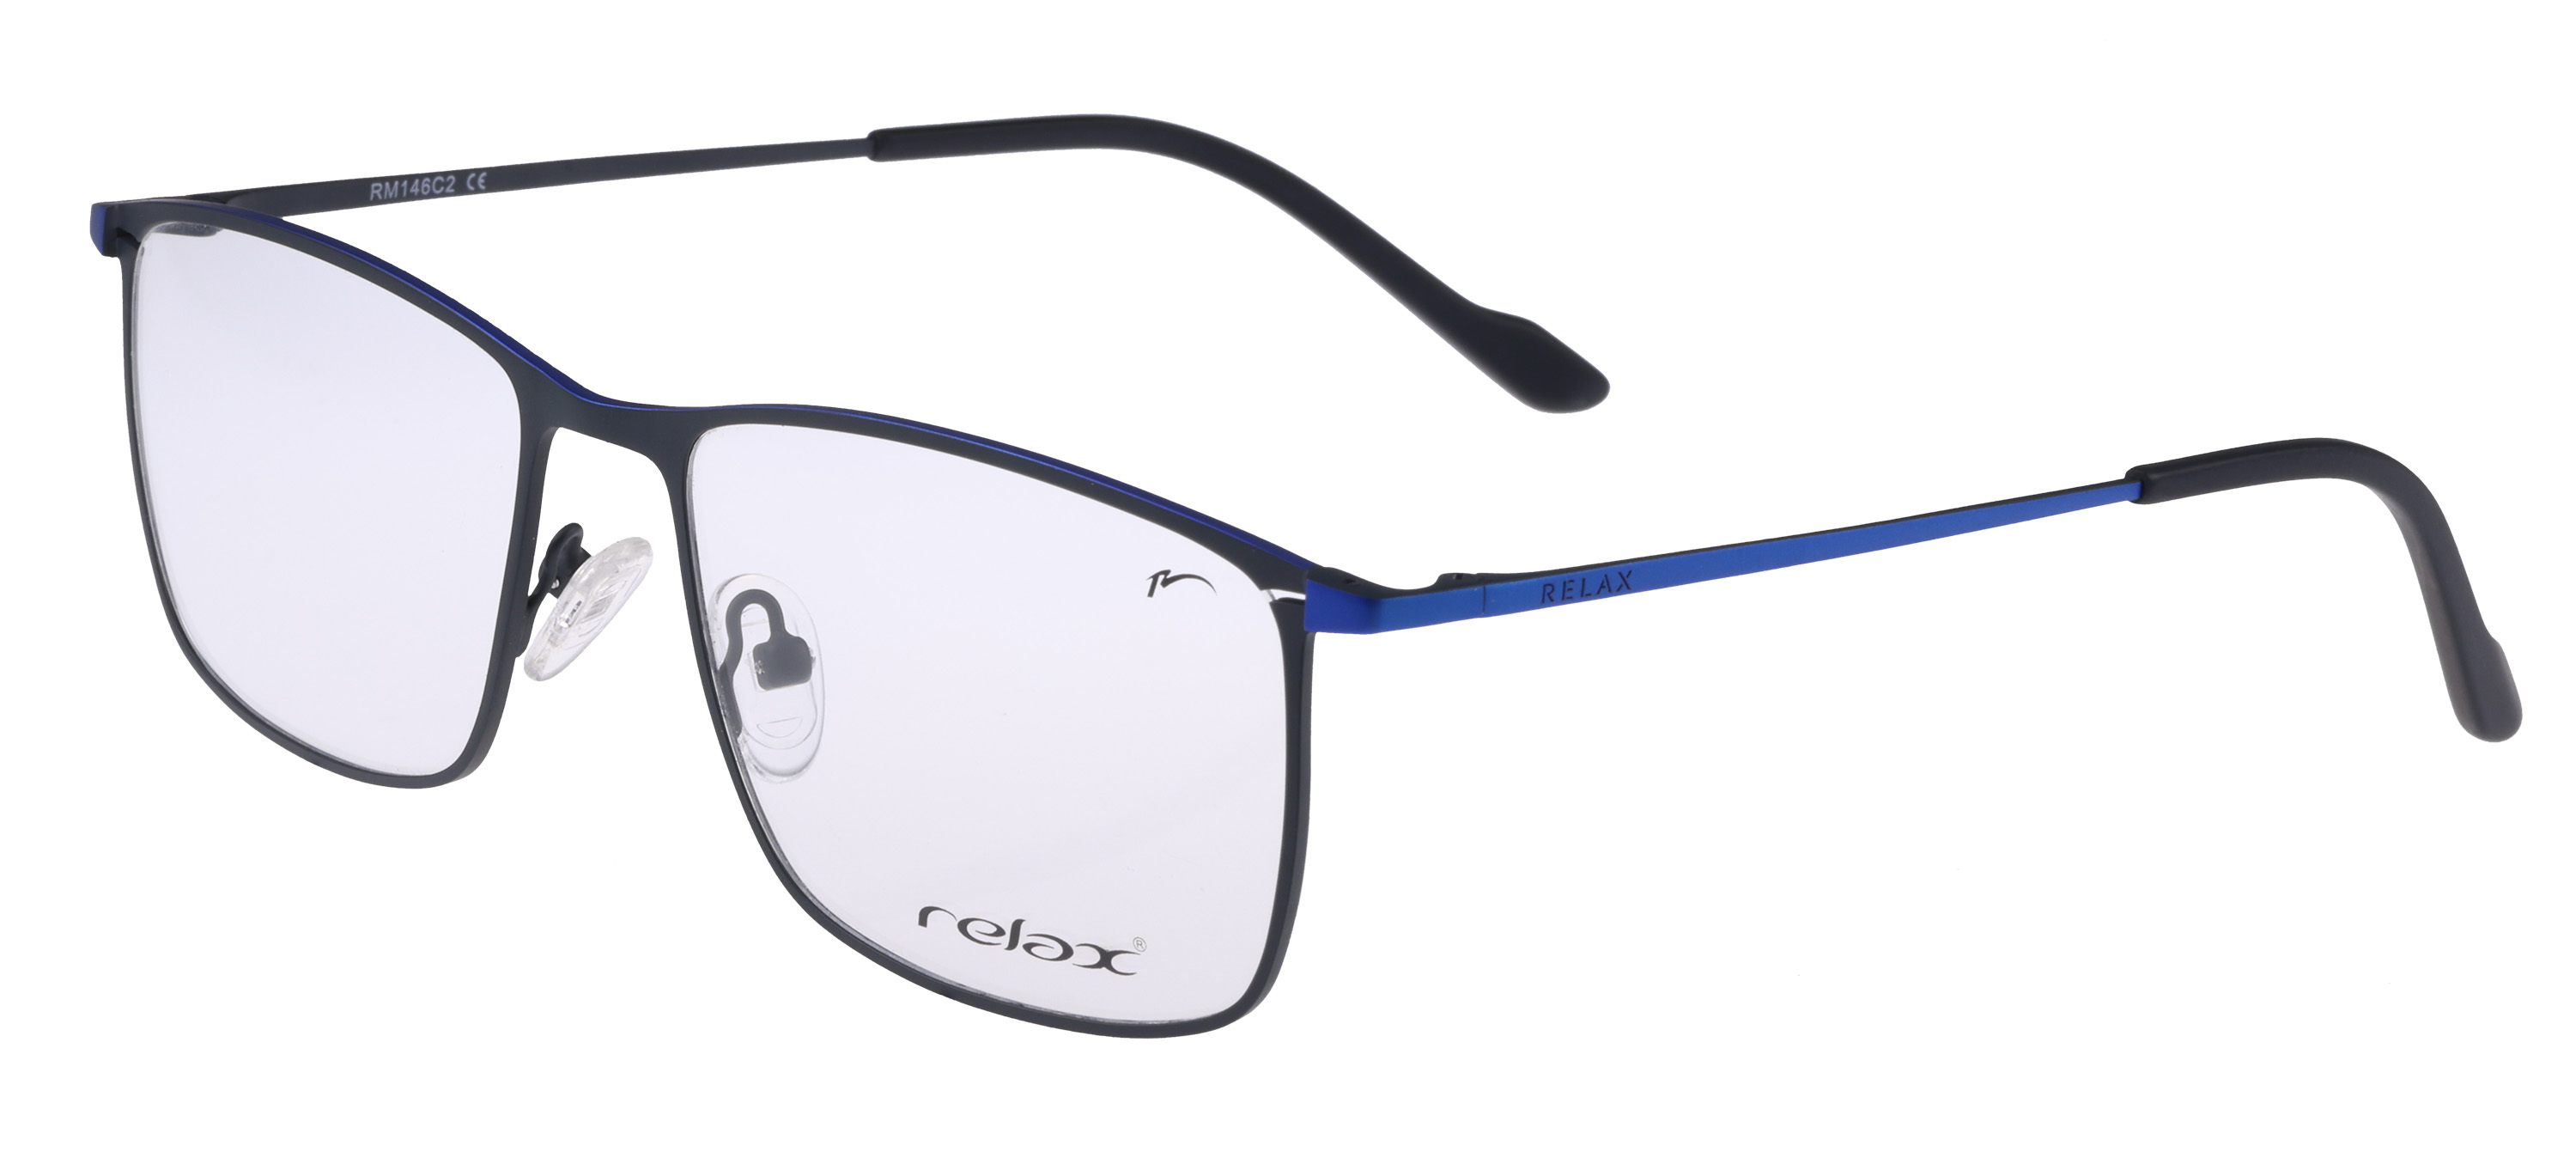 Optical frames Relax Charly RM146C2